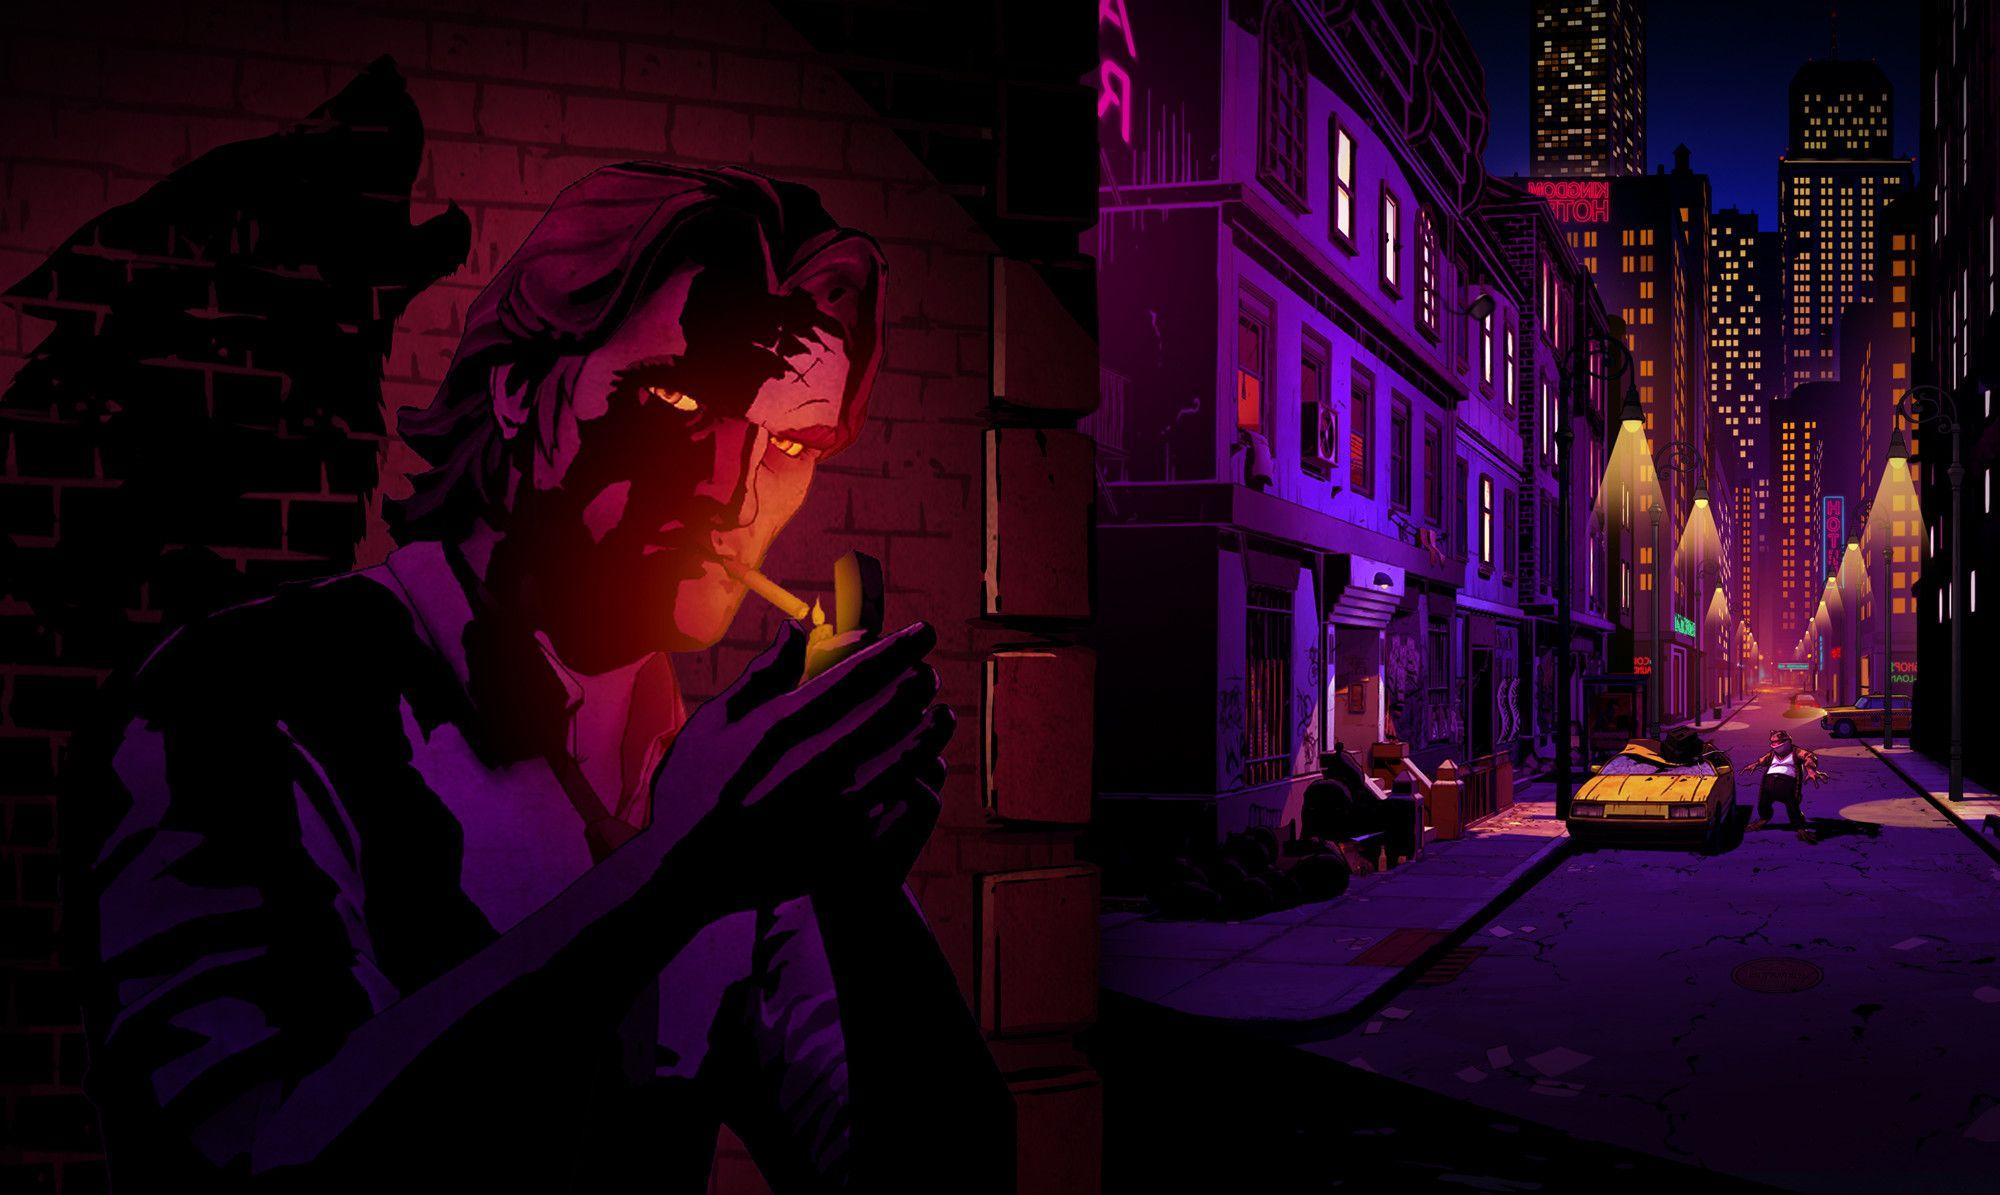 The Wolf Among Us Wallpaper